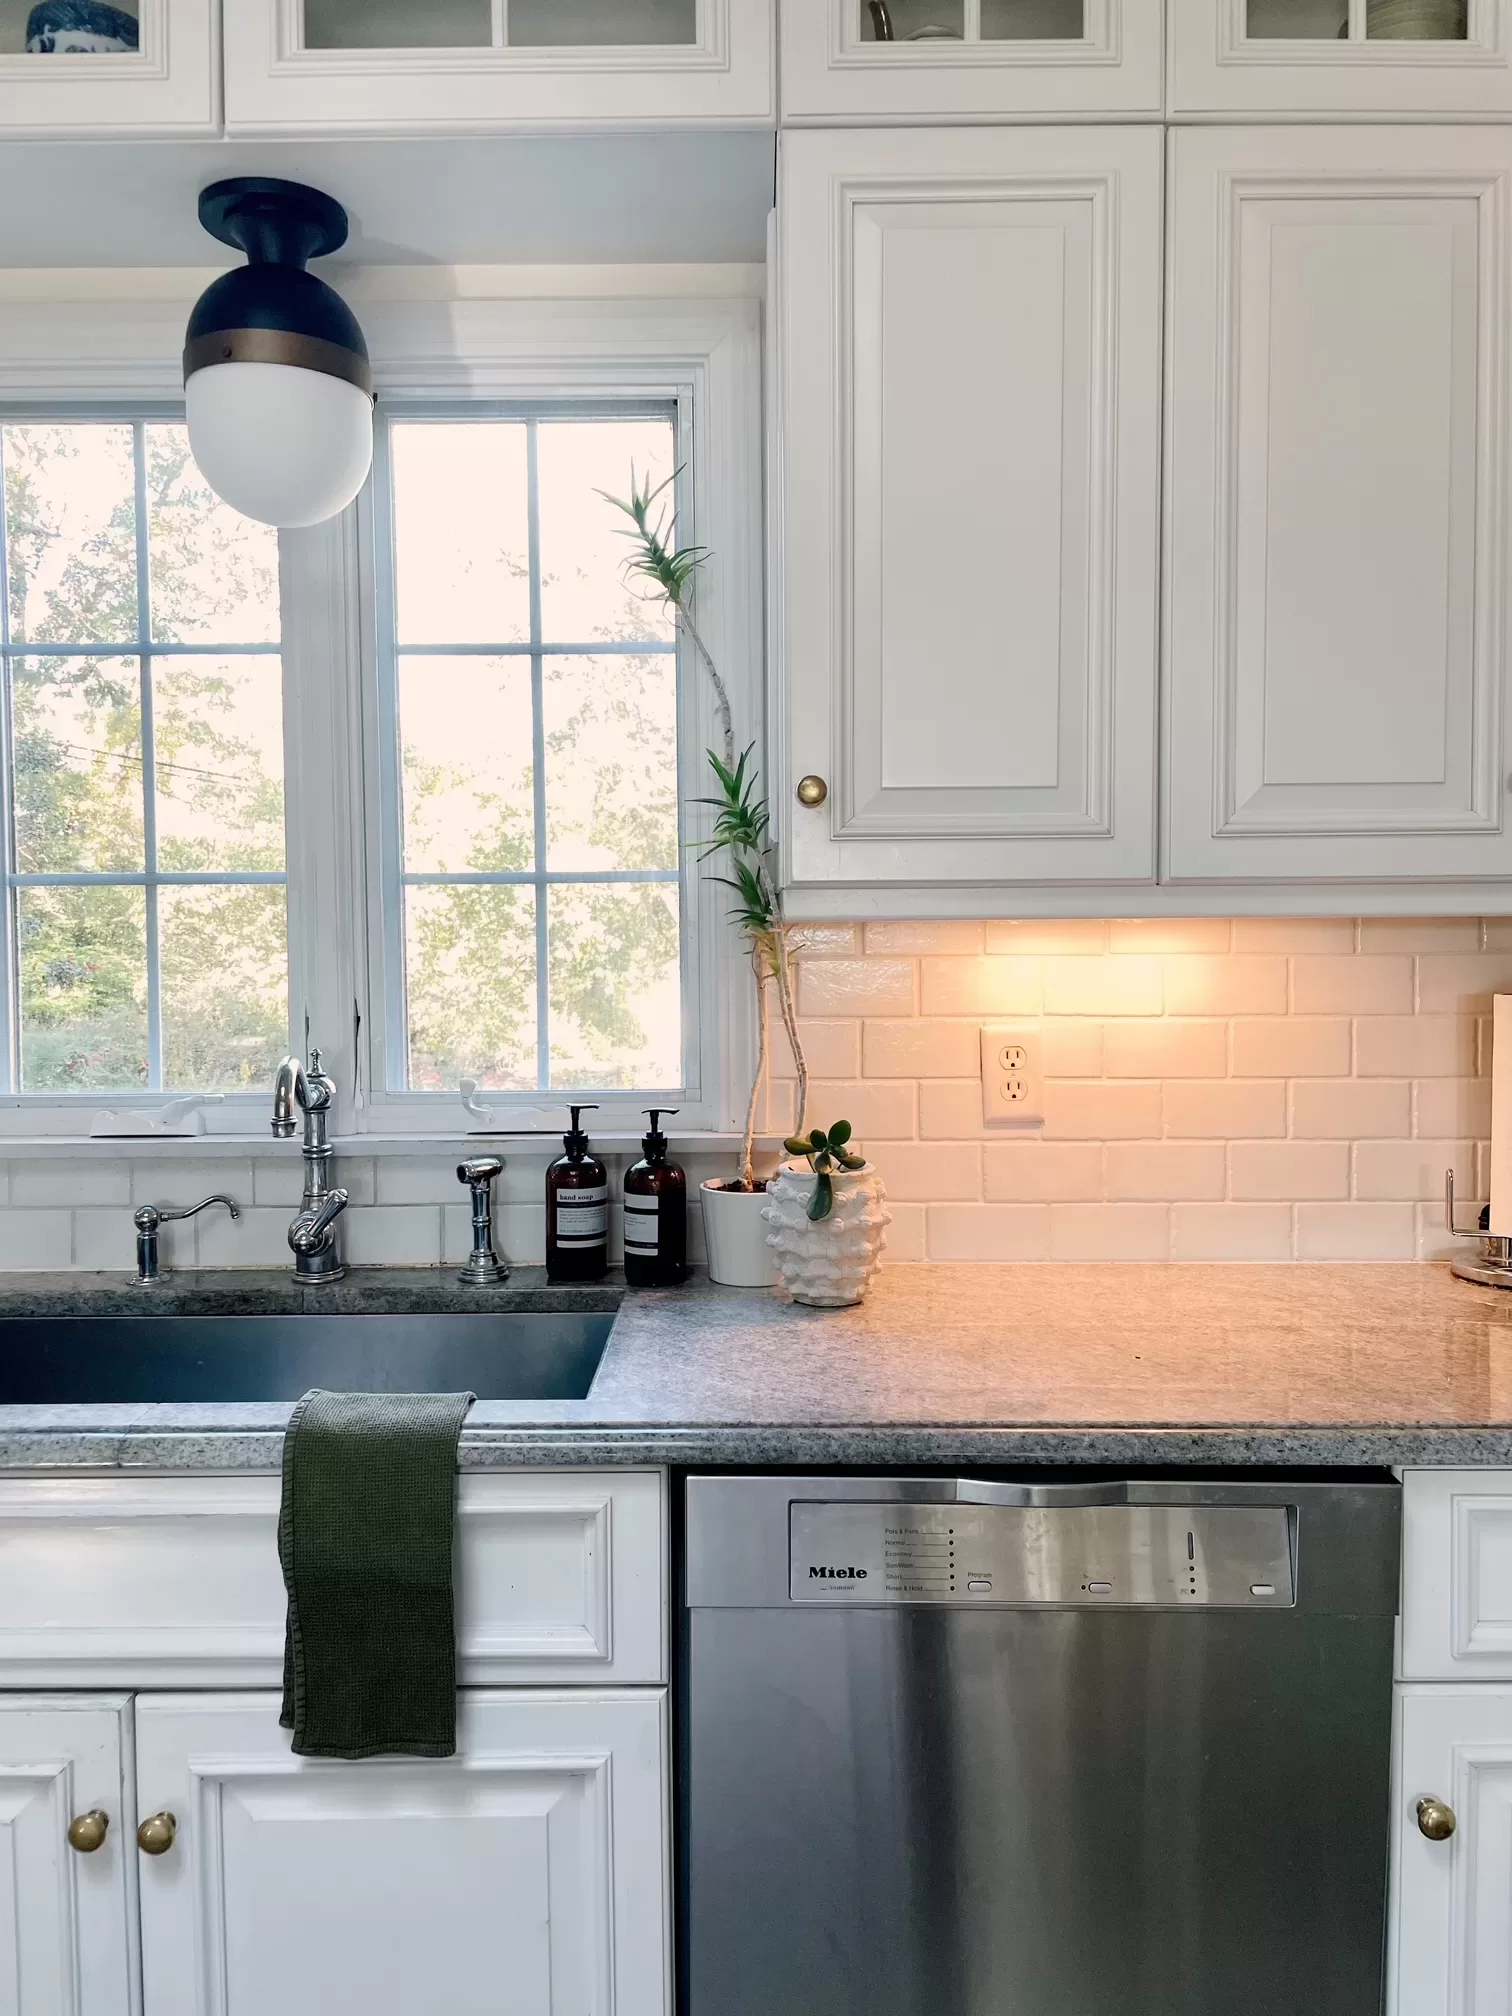 How to Choose Under-Cabinet Lighting, Plus the Best Under-Cabinet Lights